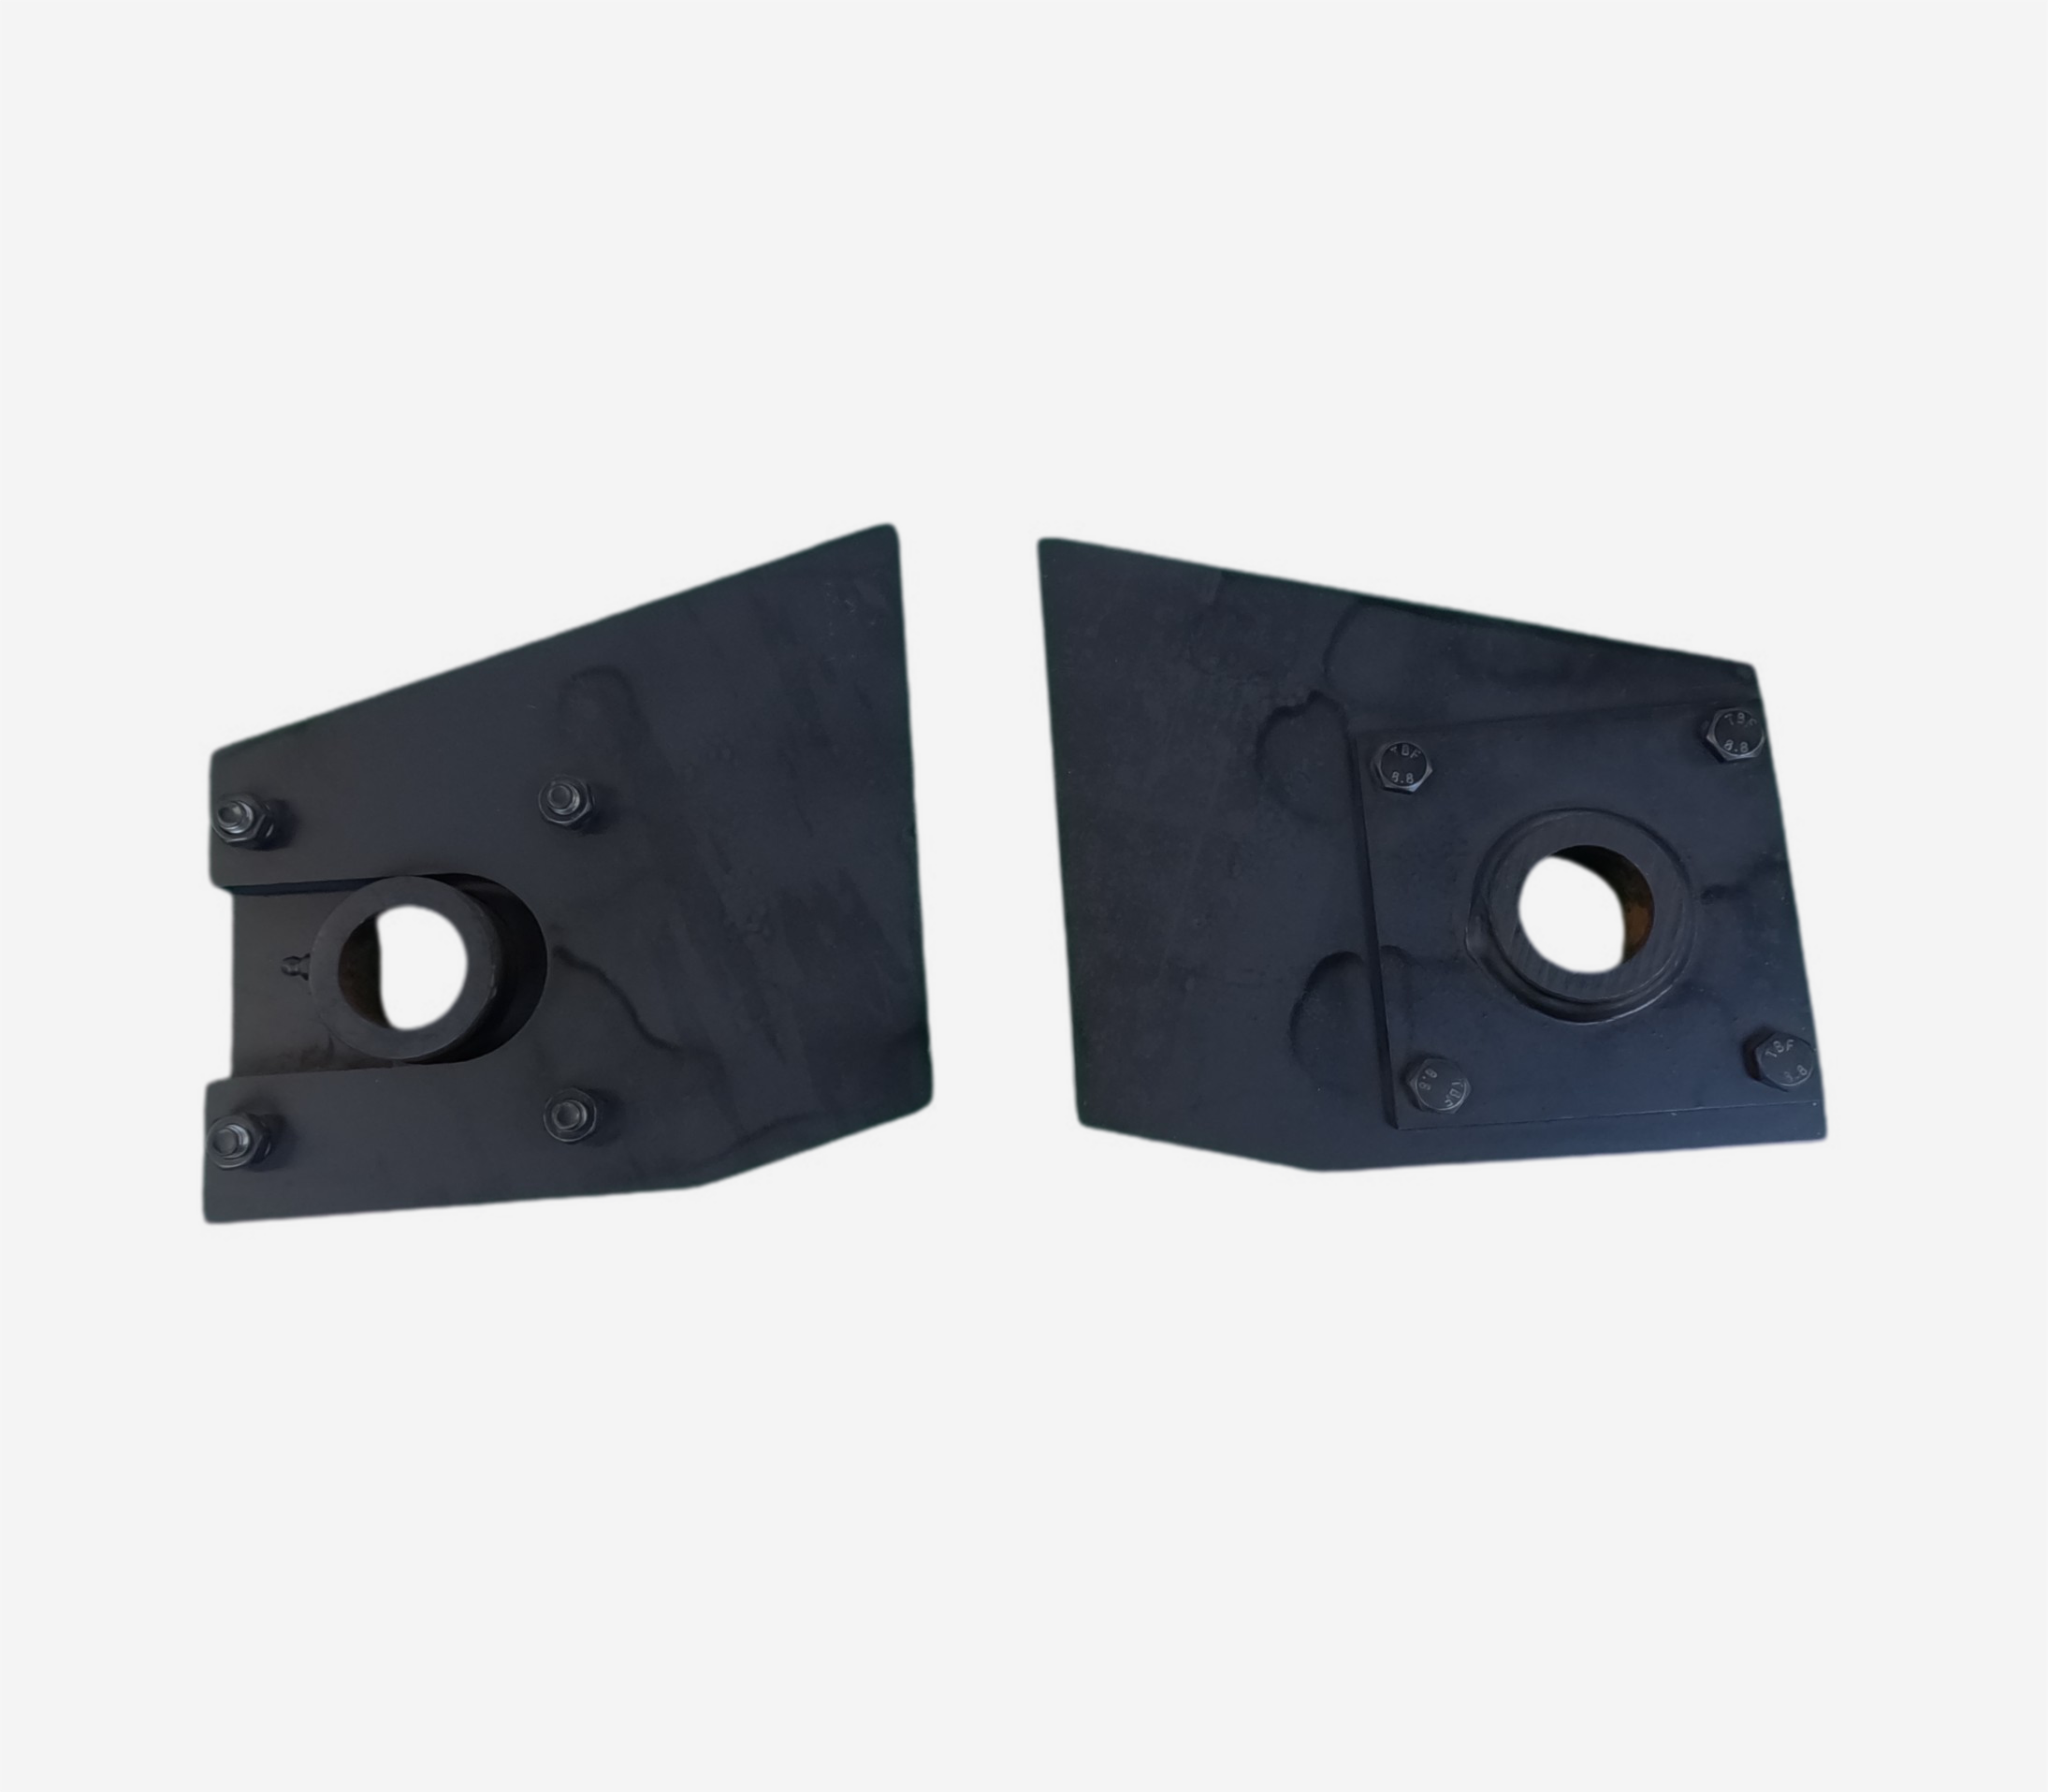 Heavy duty hinges for hydraulic dump bed systems.

